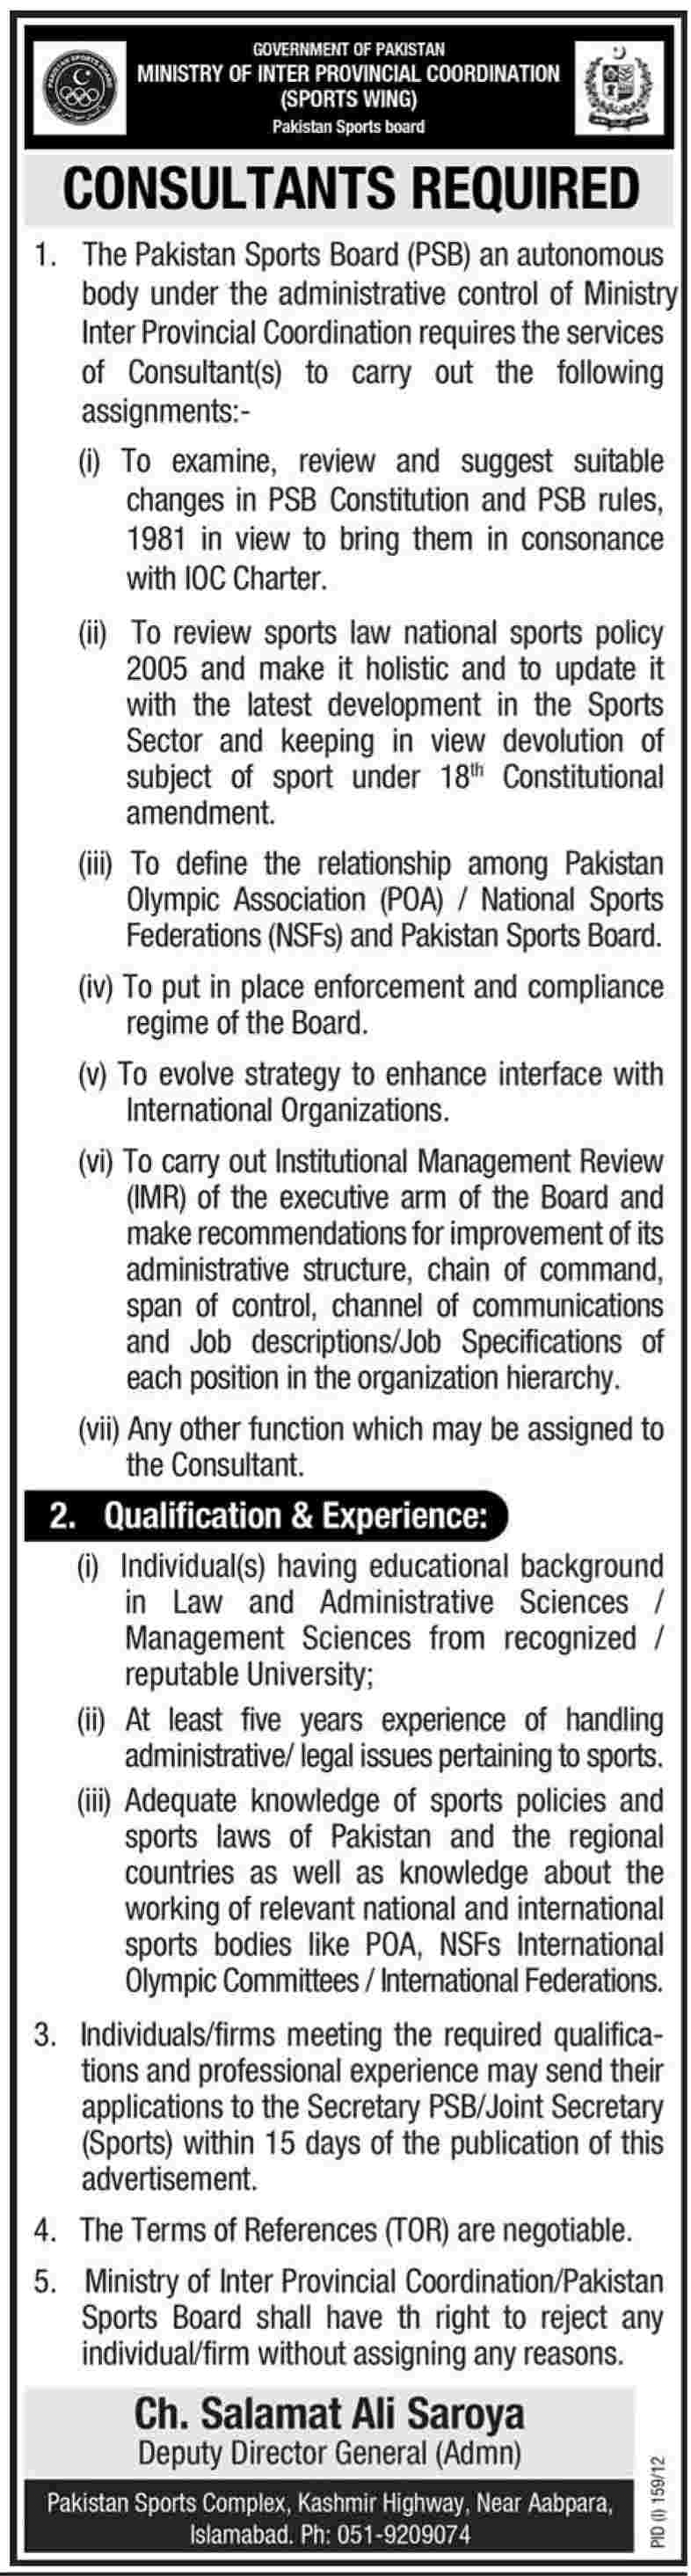 Pakistan Sports Boad Requires Consultants Under Ministry of Inter Provincial Coordination (Govt. job)